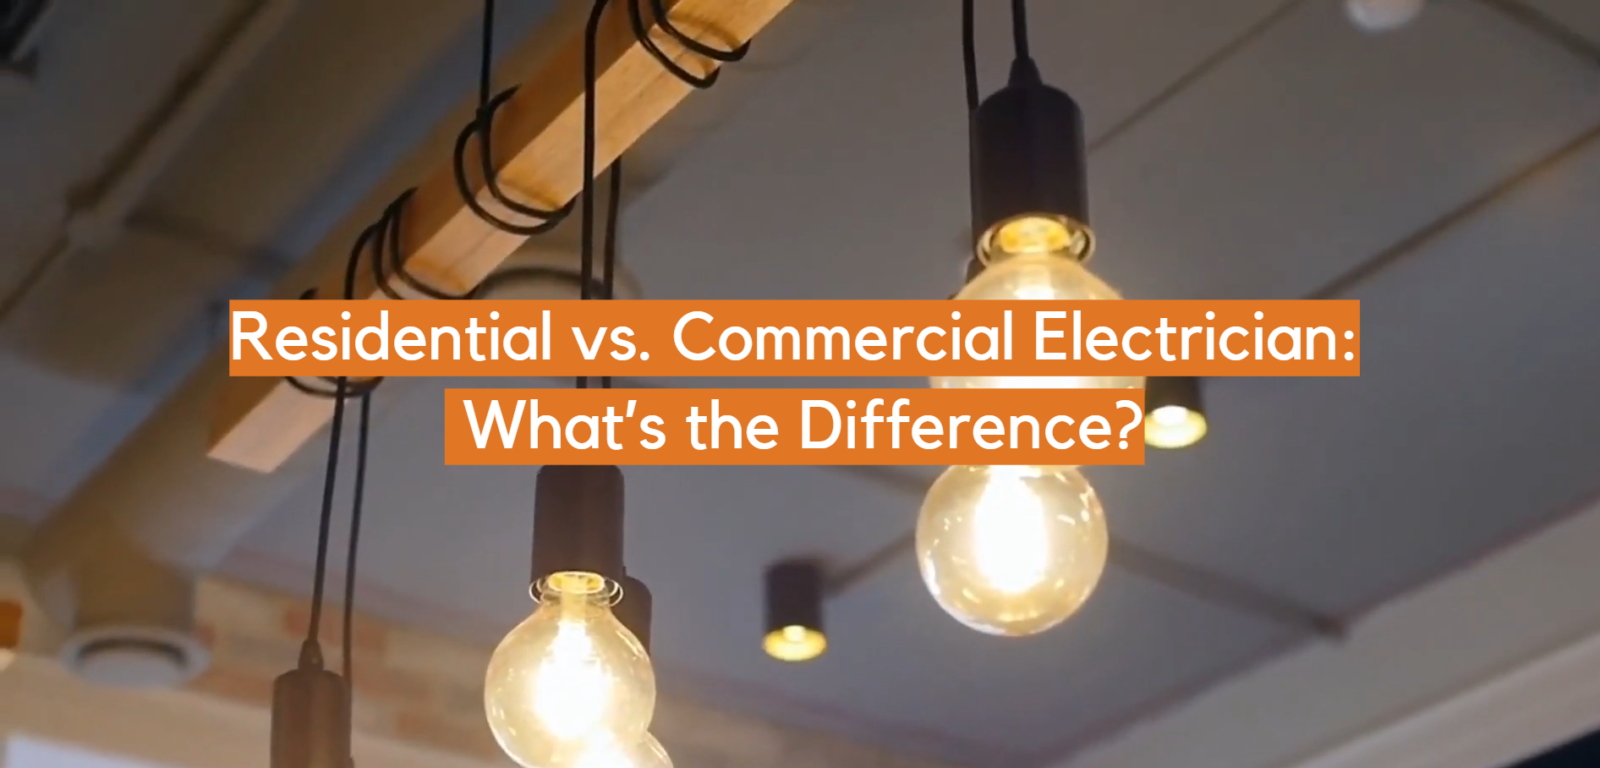 Residential vs. Commercial Electrician: What’s the Difference?